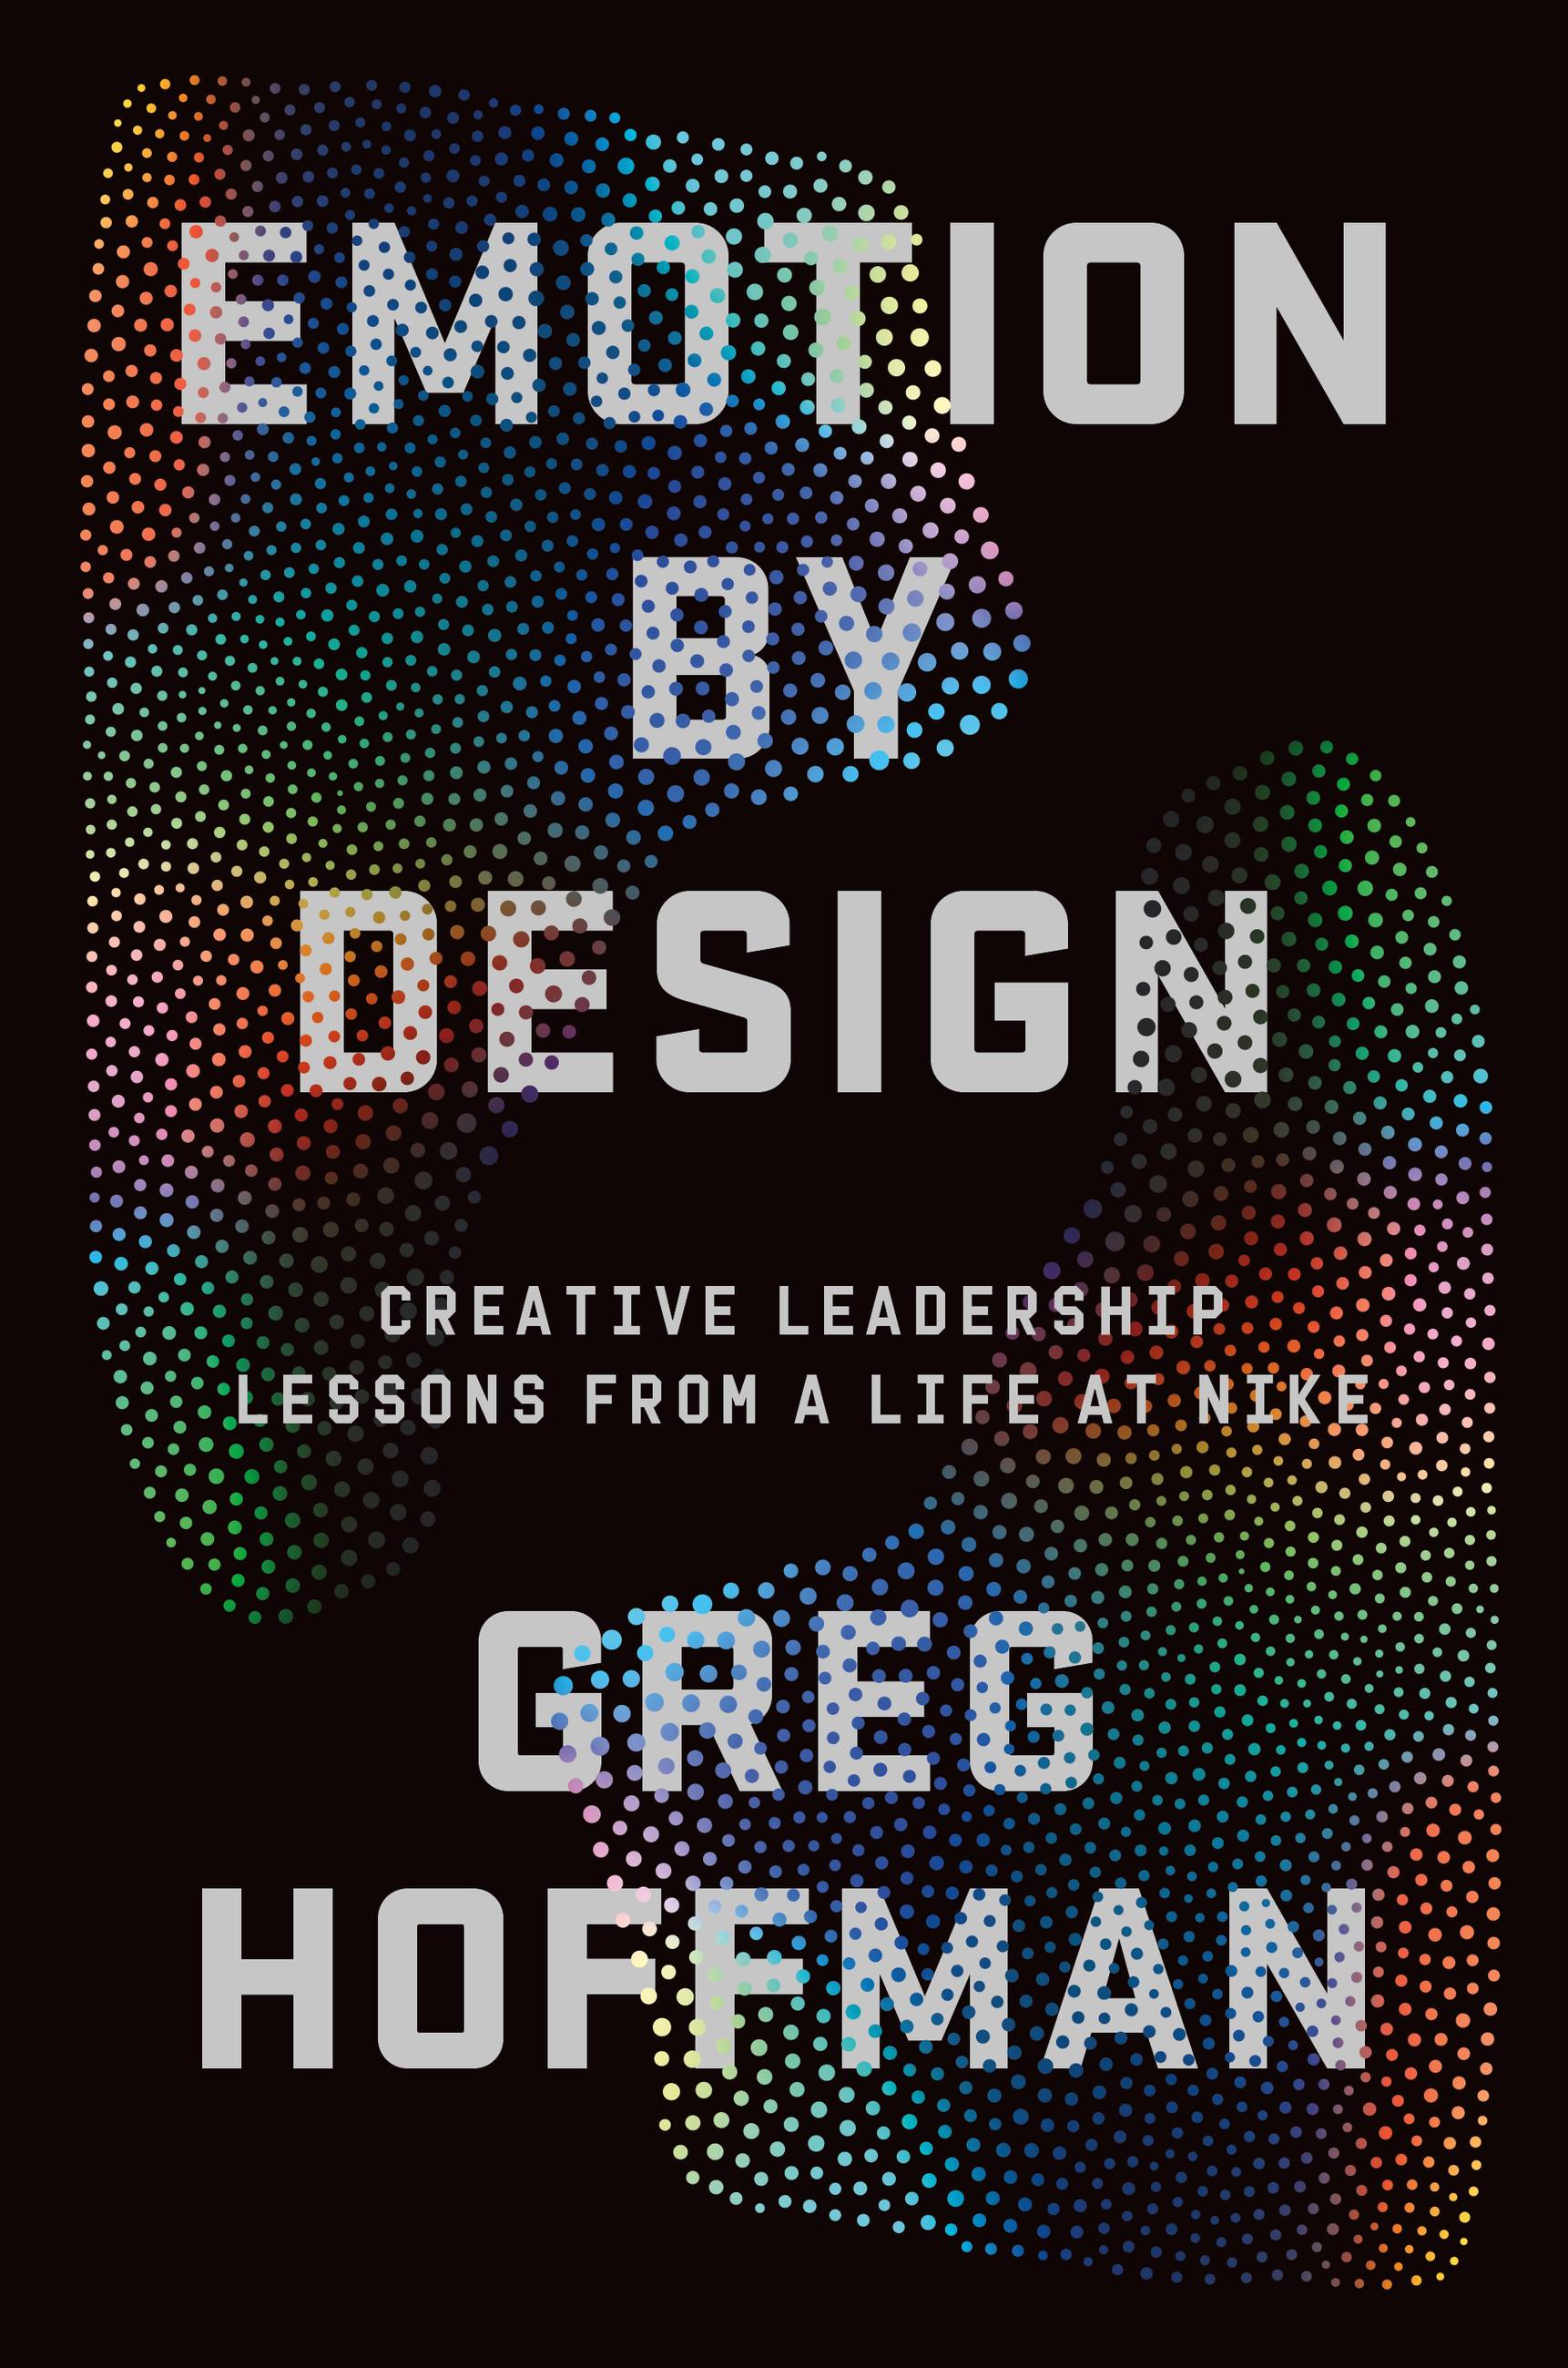 by　Design　Book　Emotion　Group　Hoffman　By　Greg　Hachette